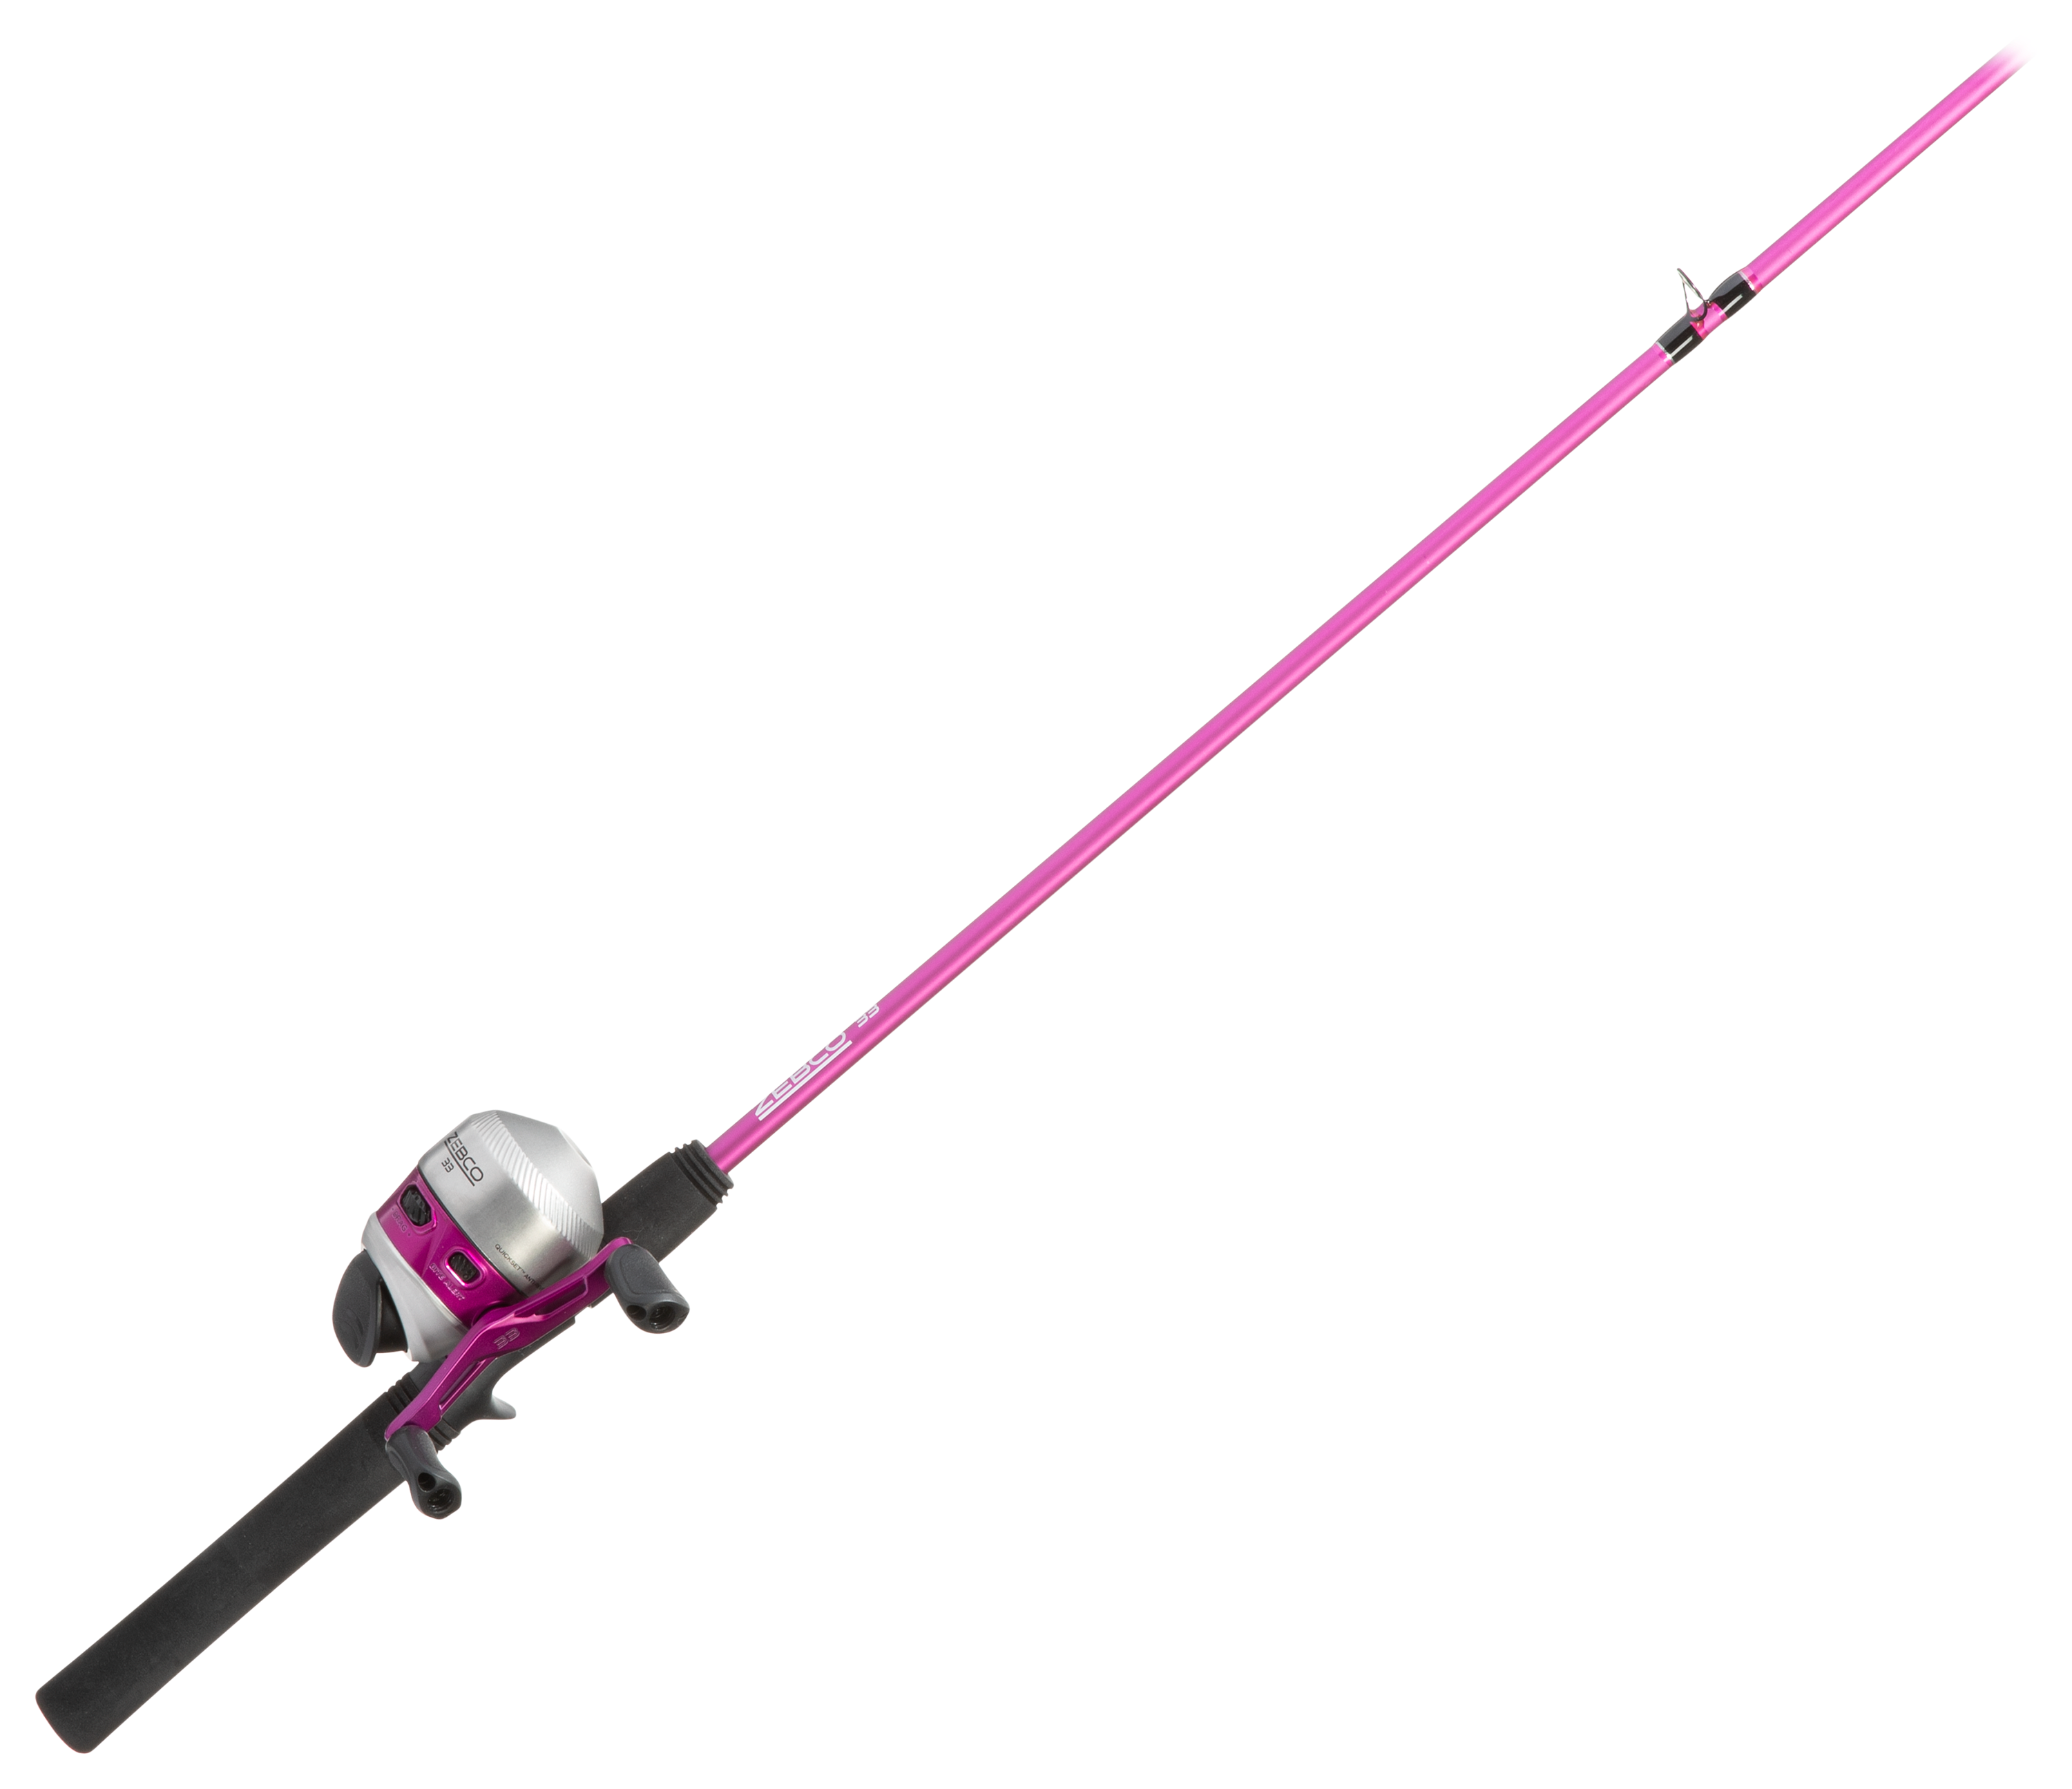 Spincast Combos - Spincast Rod And Reel Combos